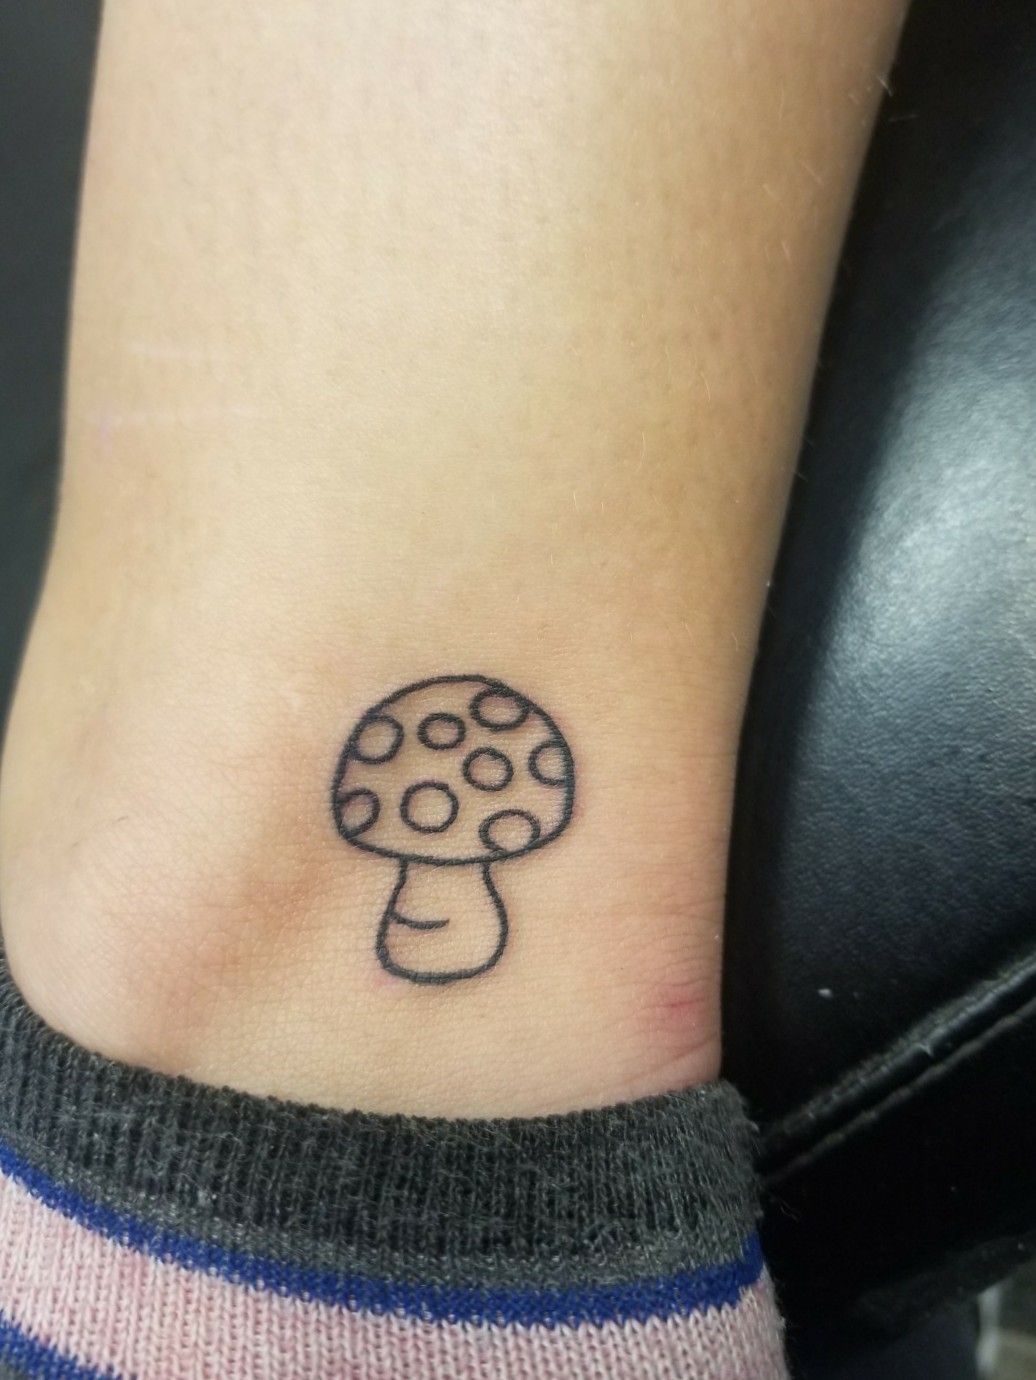 Dancing mushroom lady and snail friend  done by Zack at the Bell Rose in  Daphne AL  rtattoos